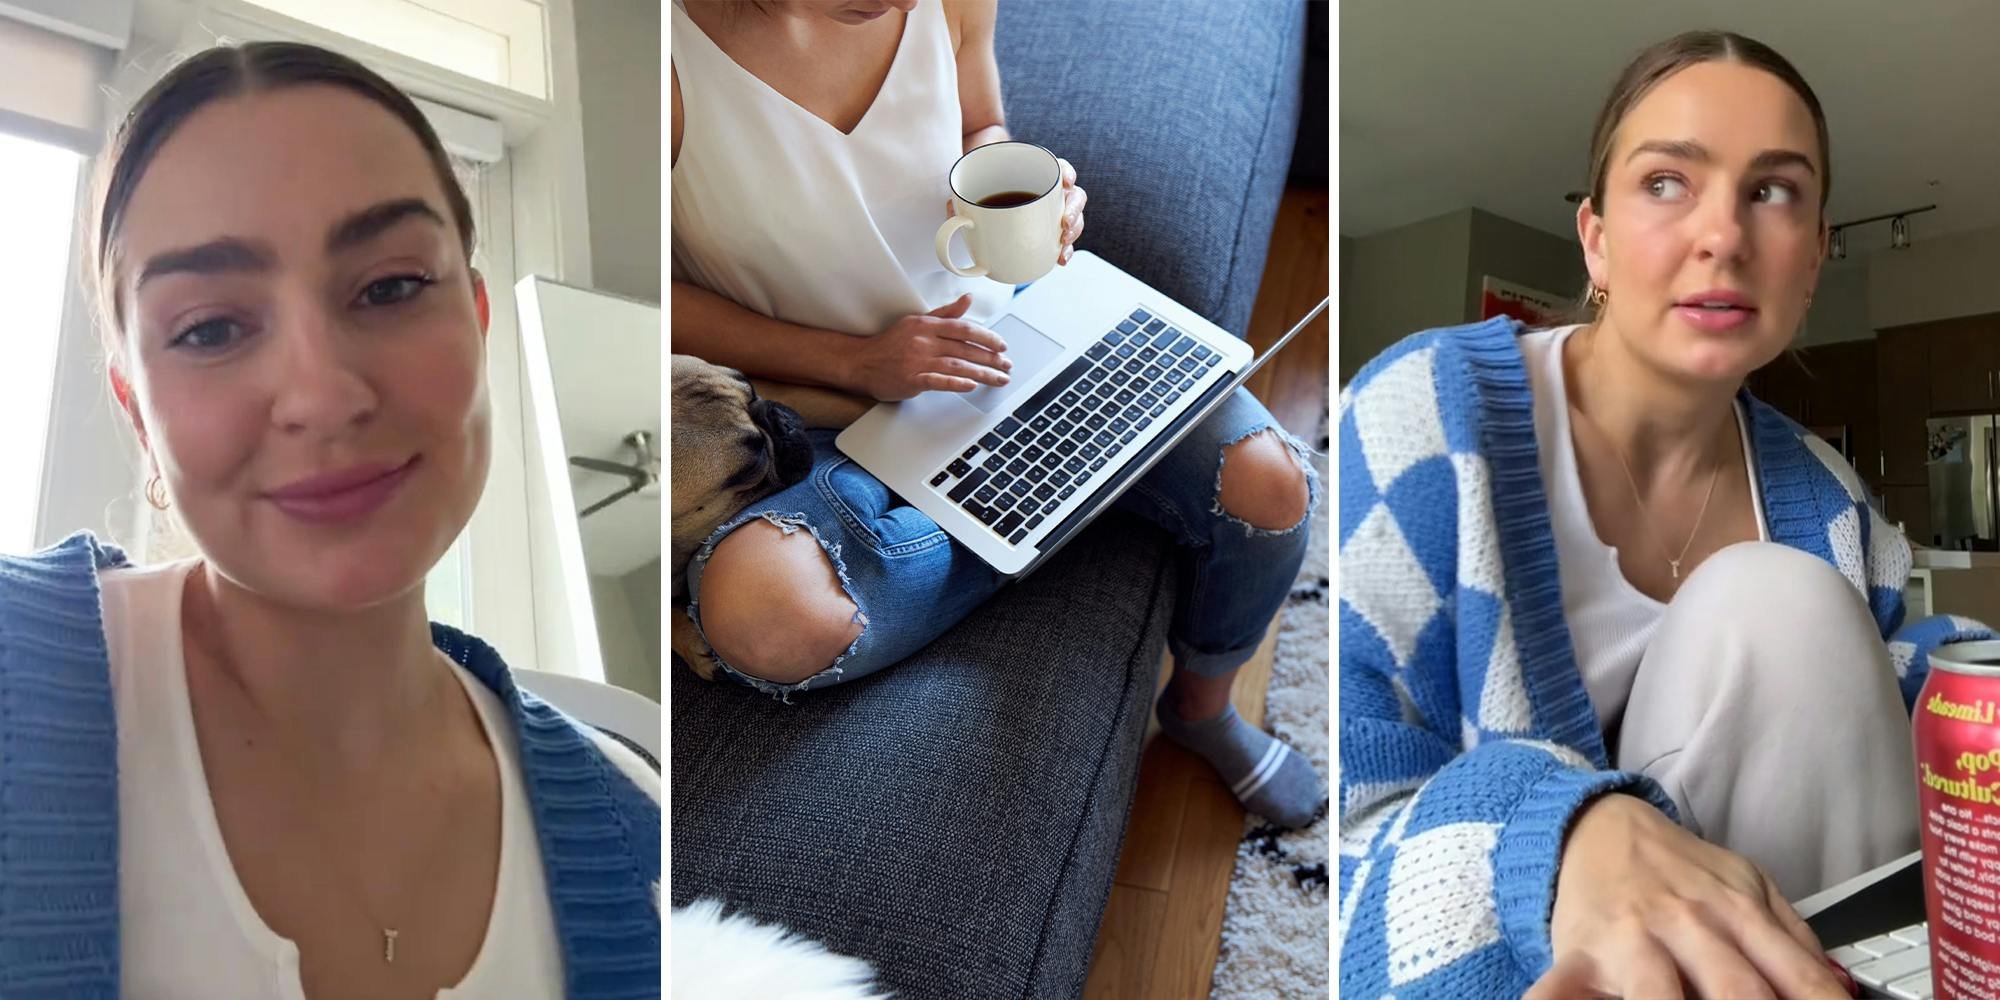 Viewers divided over WFH jobs after worker says she needs 'safe' space to be productive